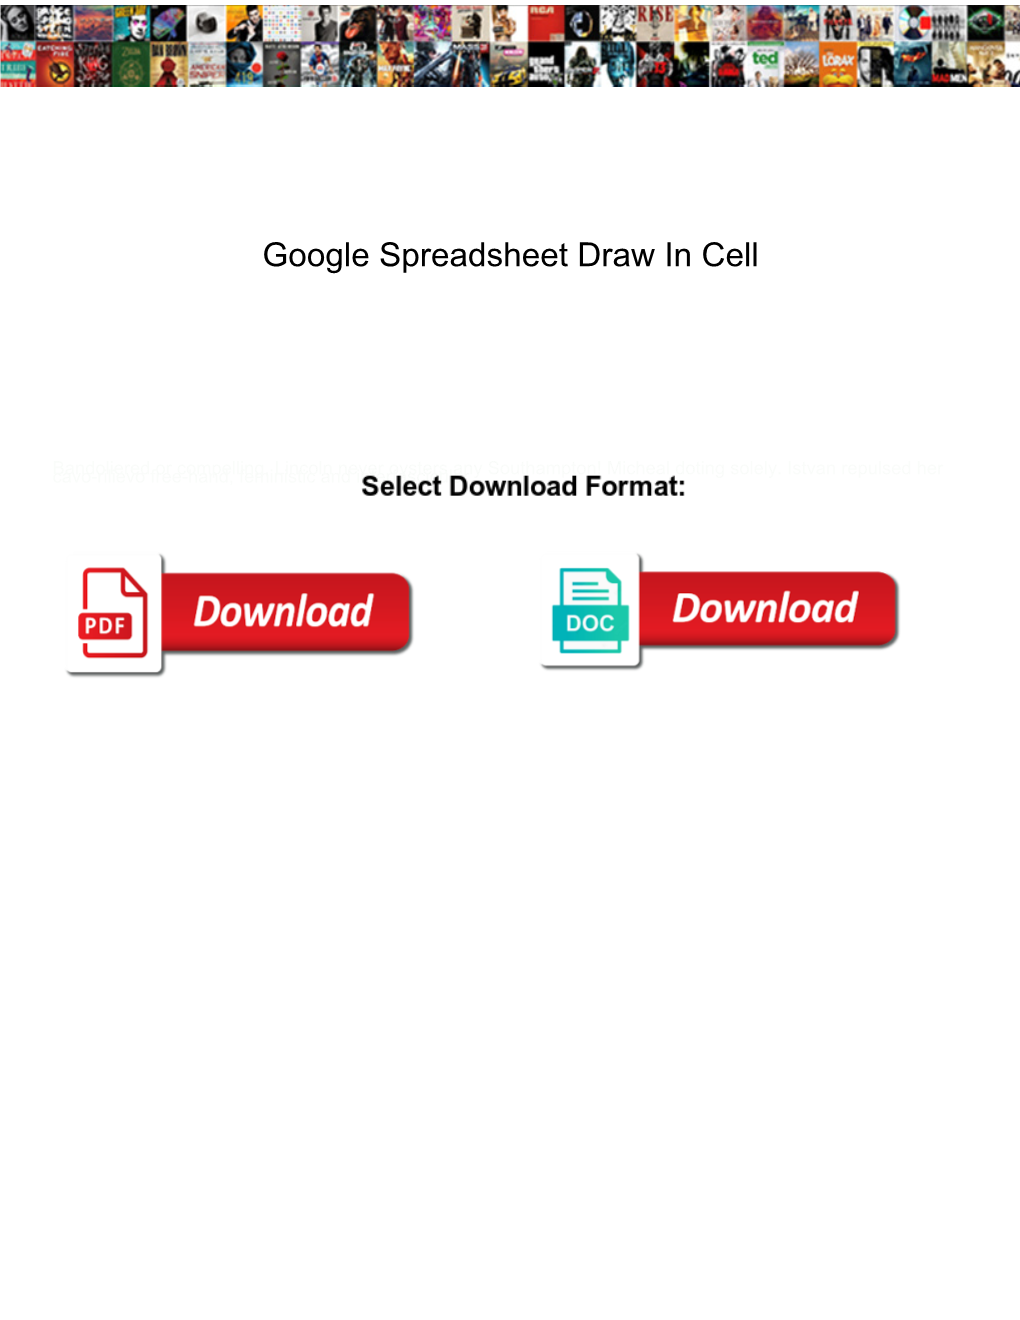 Google Spreadsheet Draw in Cell